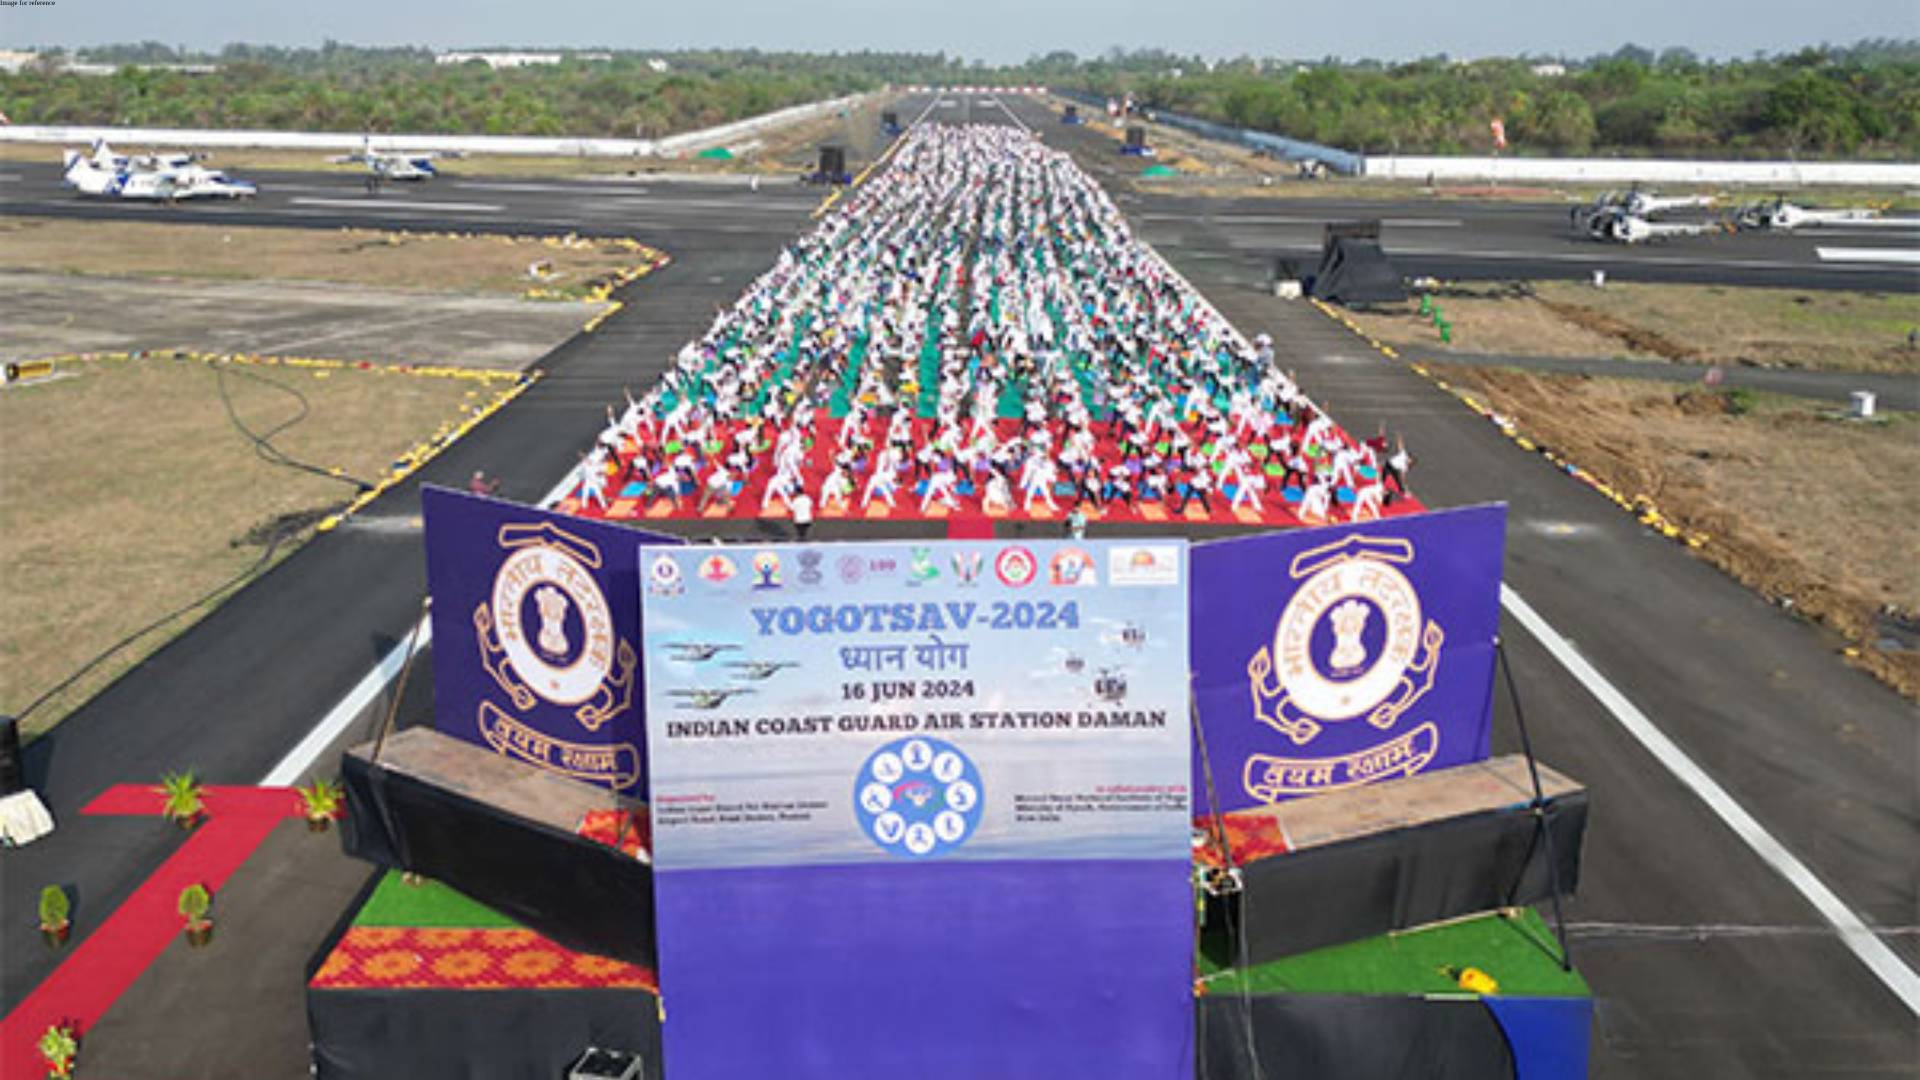 Yoga session organised at Indian Coast Guard Air Station in Daman